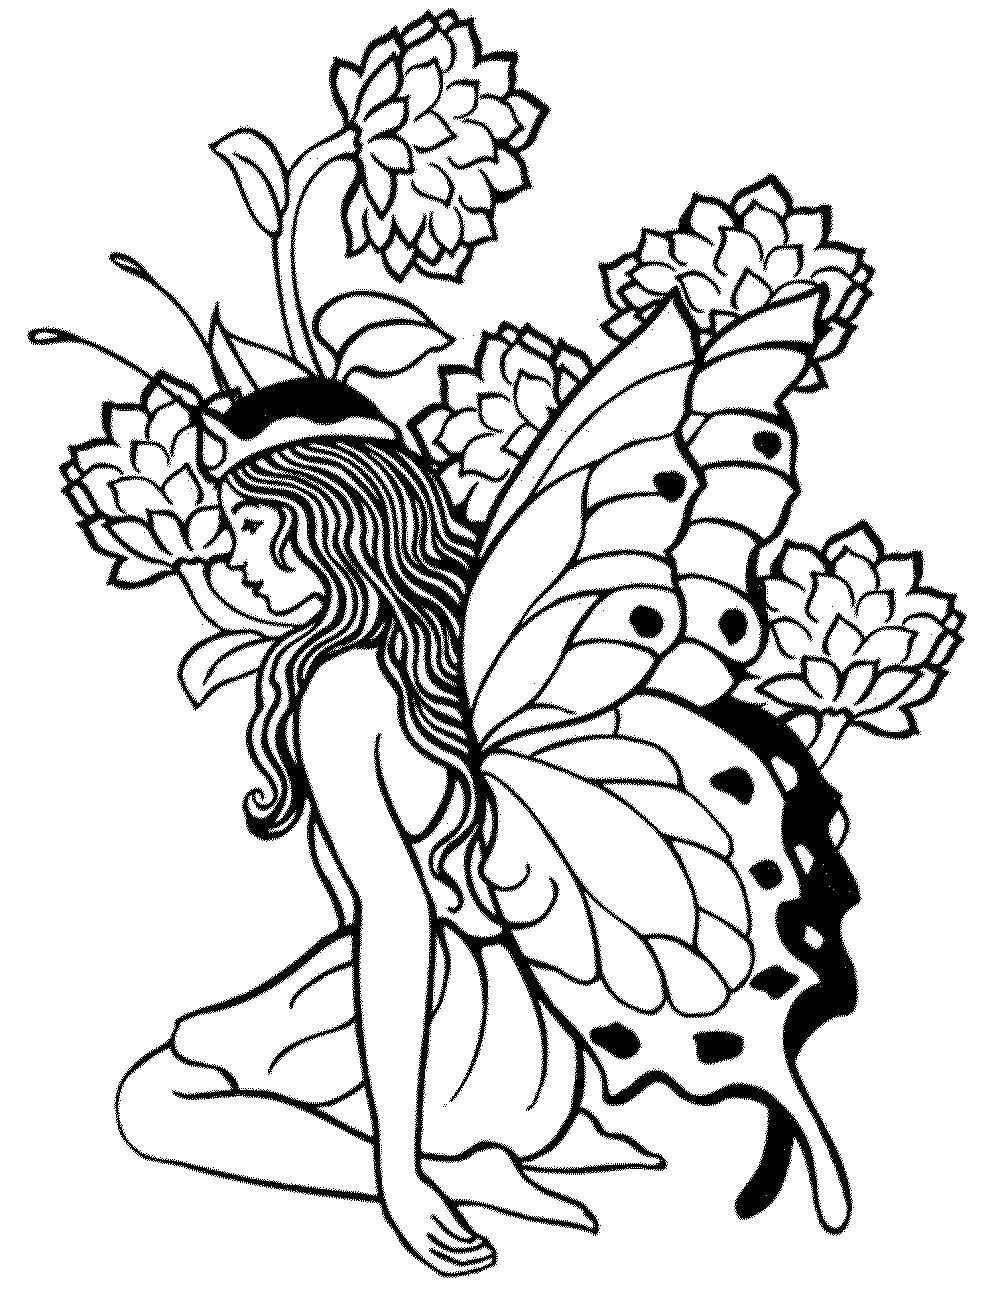 Coloring Fairy and flowers. Category coloring pages for teenagers. Tags:  fairy, flowers, wings, girl.